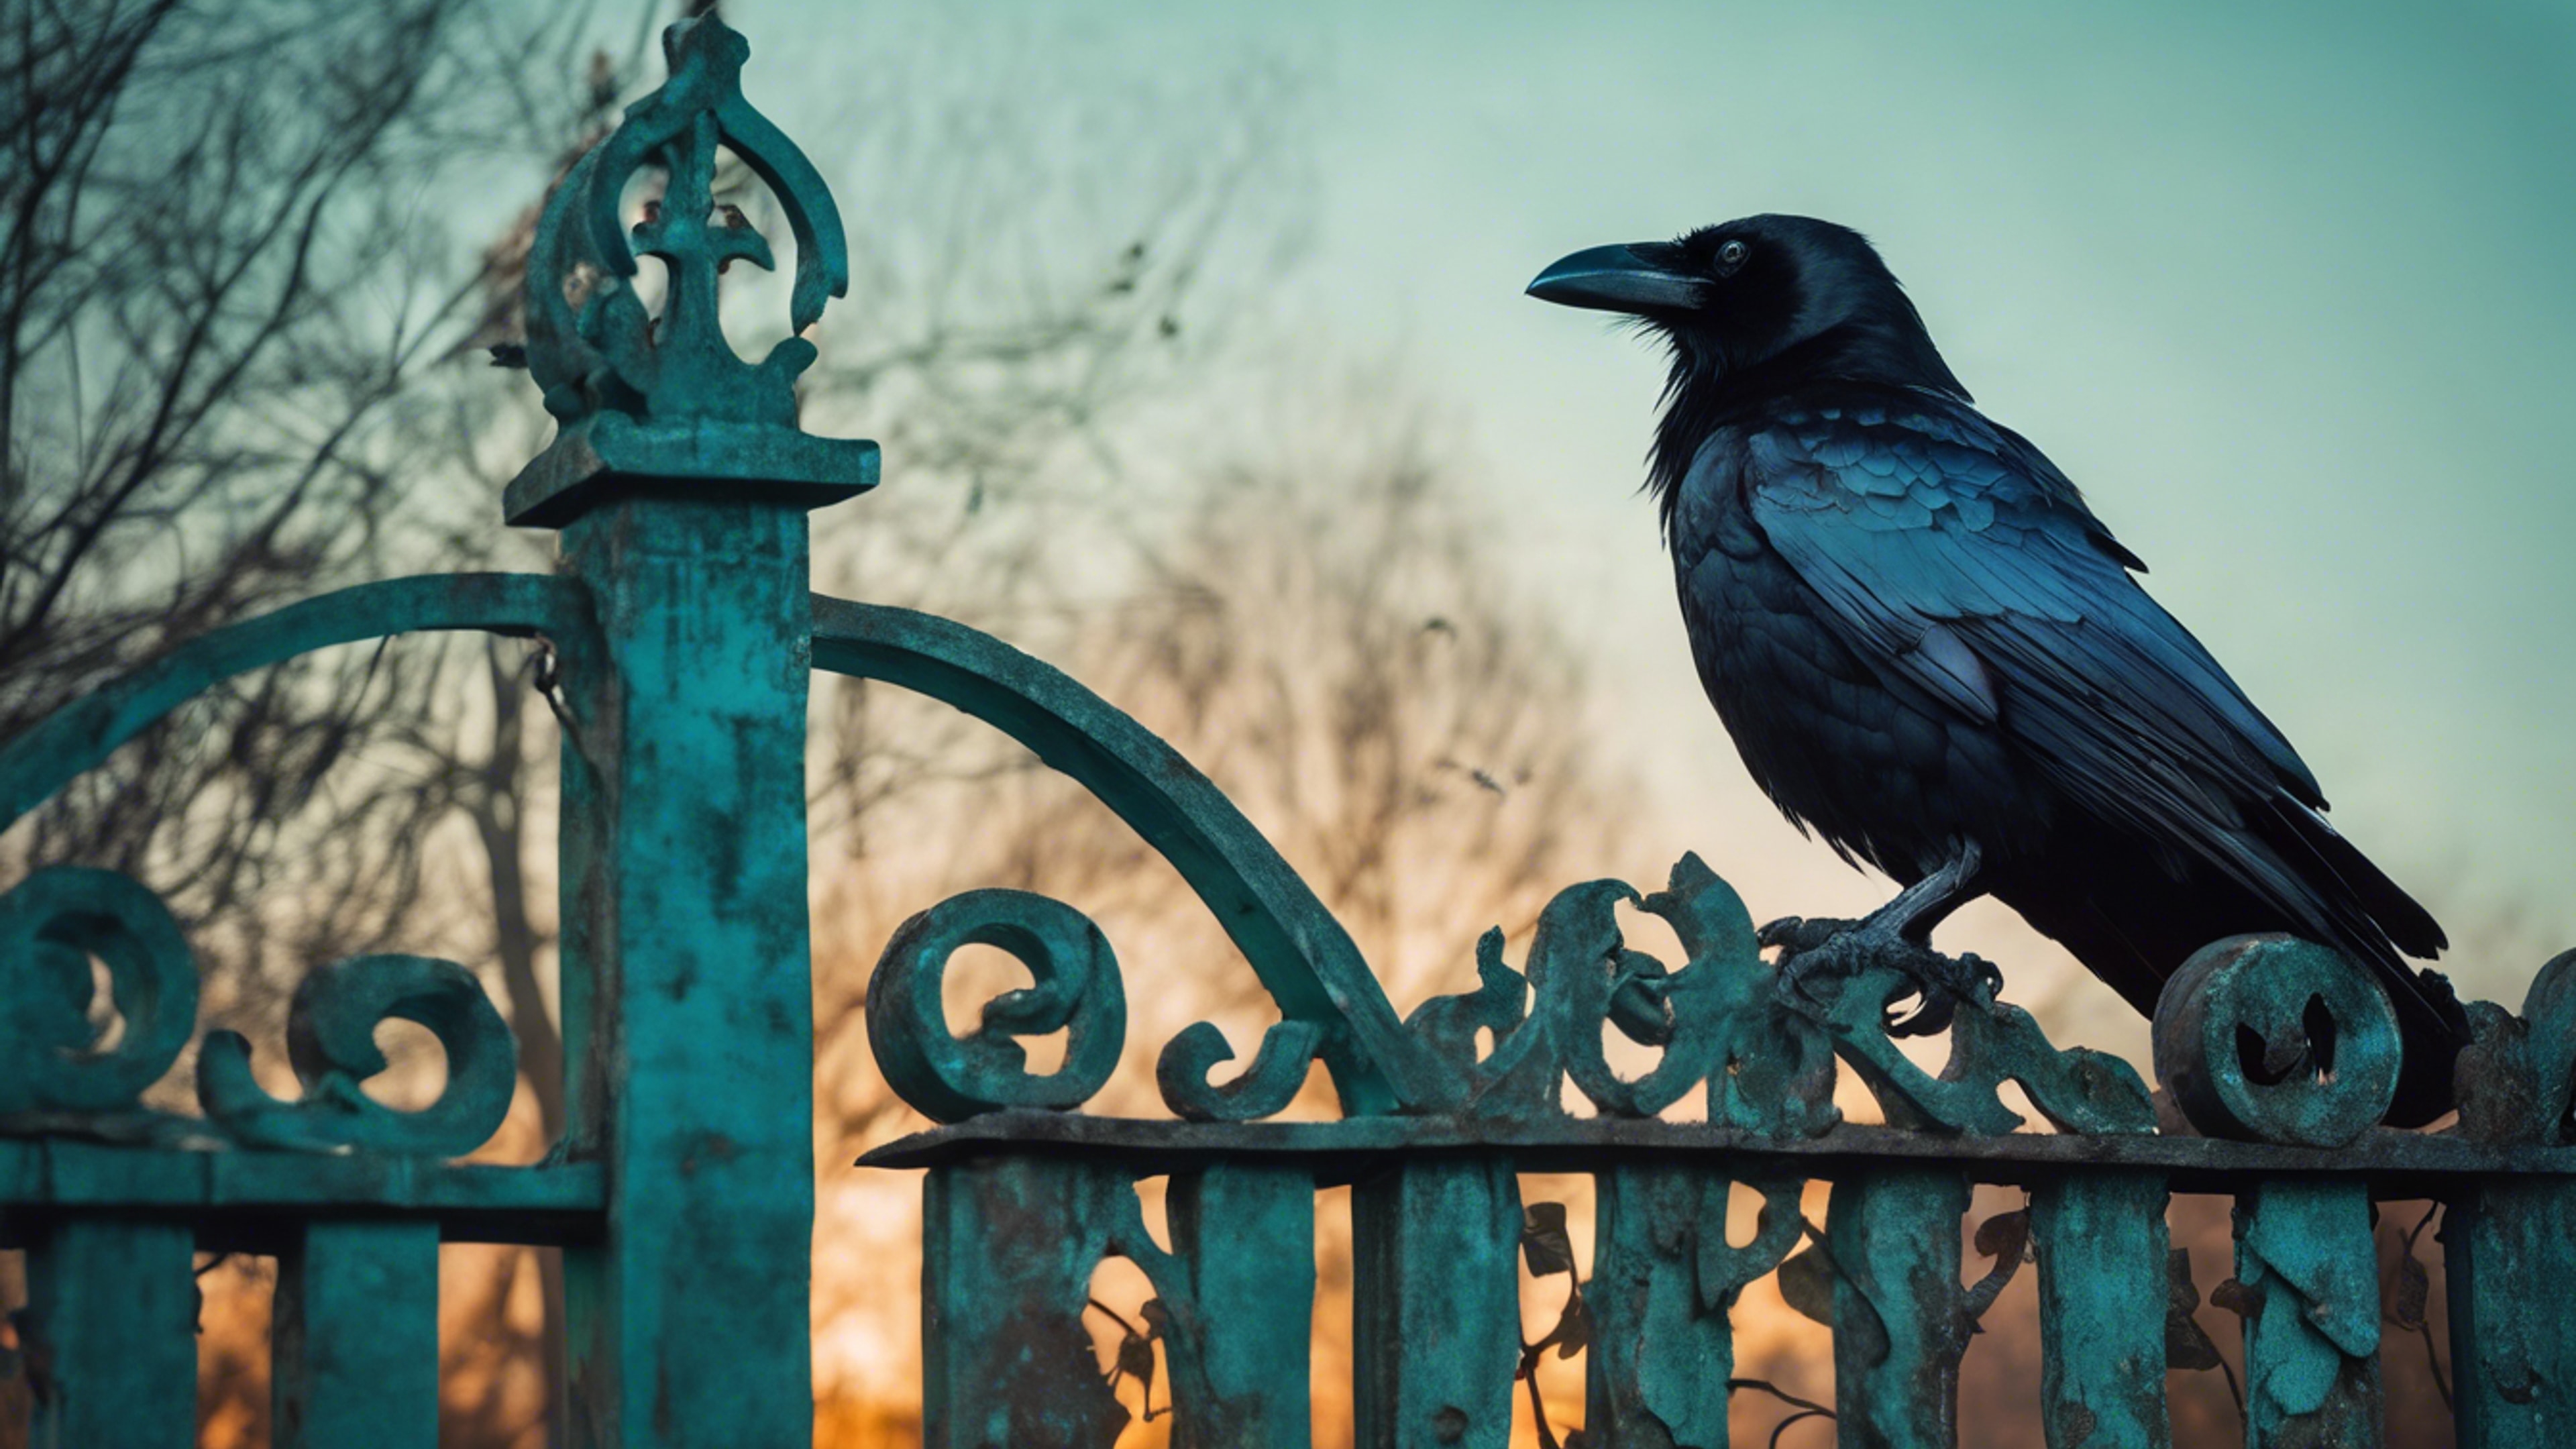 A Gothic raven perched on a dilapidated garden gate, aglow with the mesmerizing light of a teal moon. Hintergrund[c5fc313733614ce1ad34]